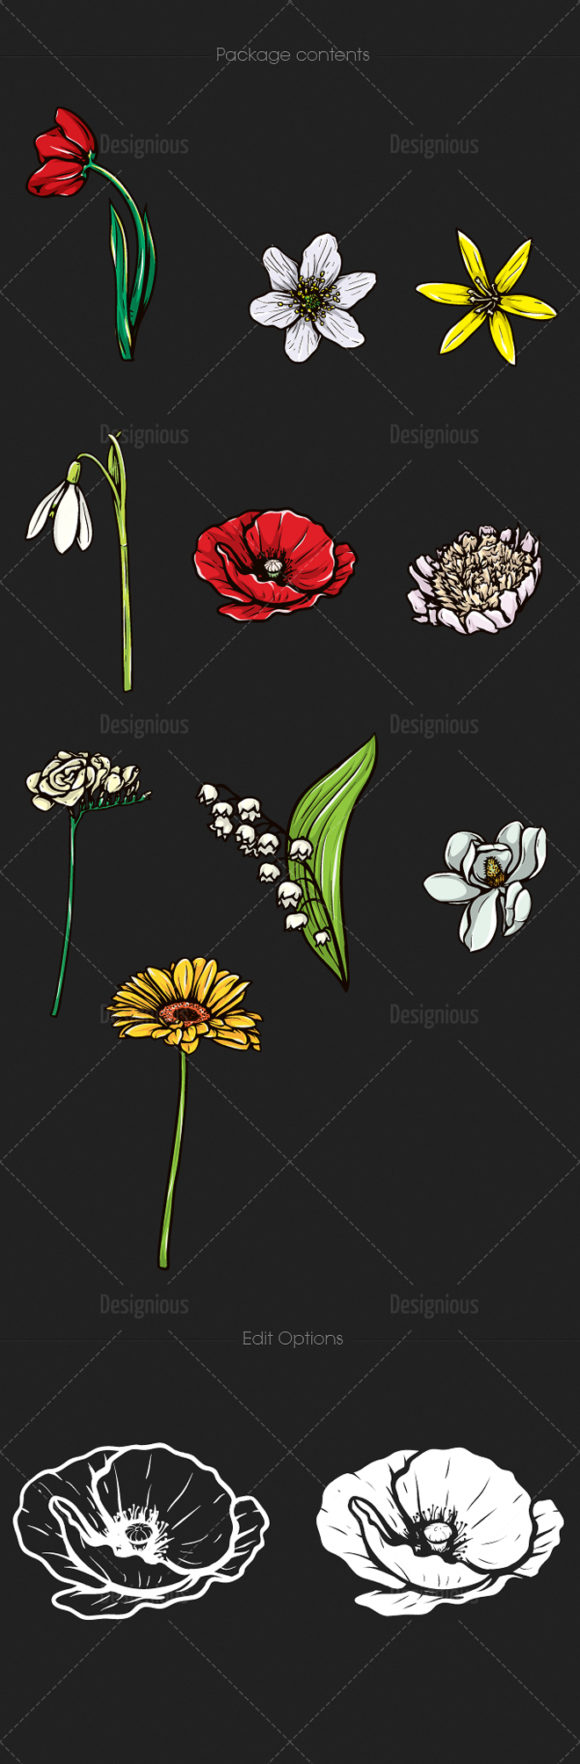 Floral Vector Pack 108 2